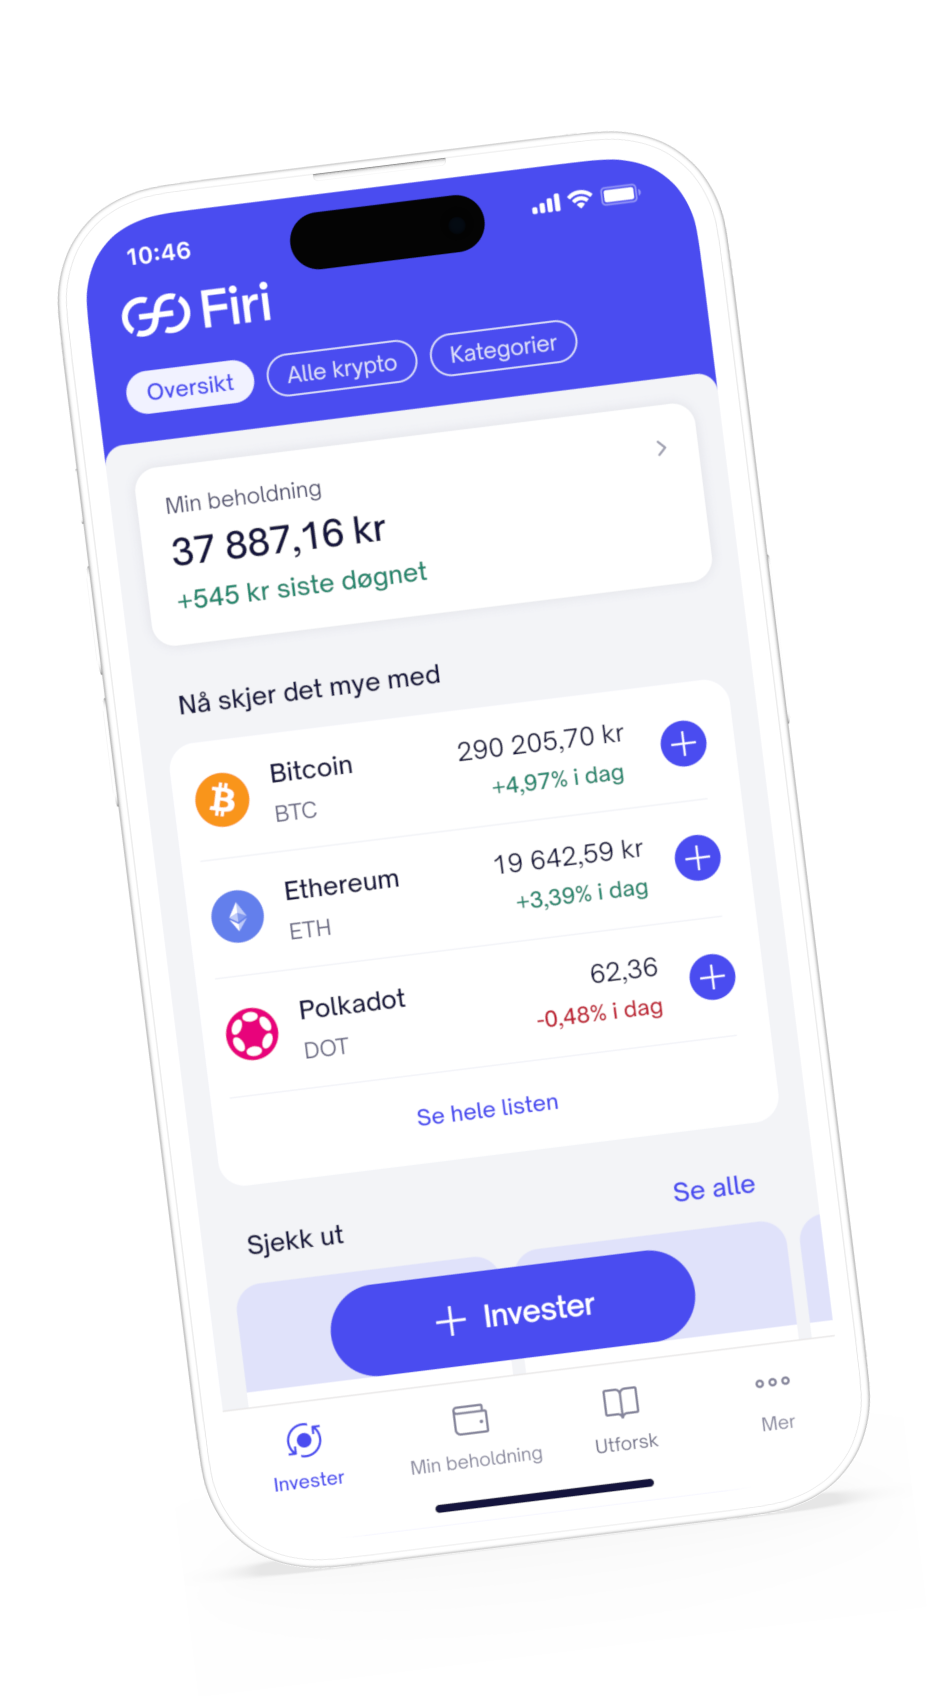 Best Crypto Exchanges in Norway in 